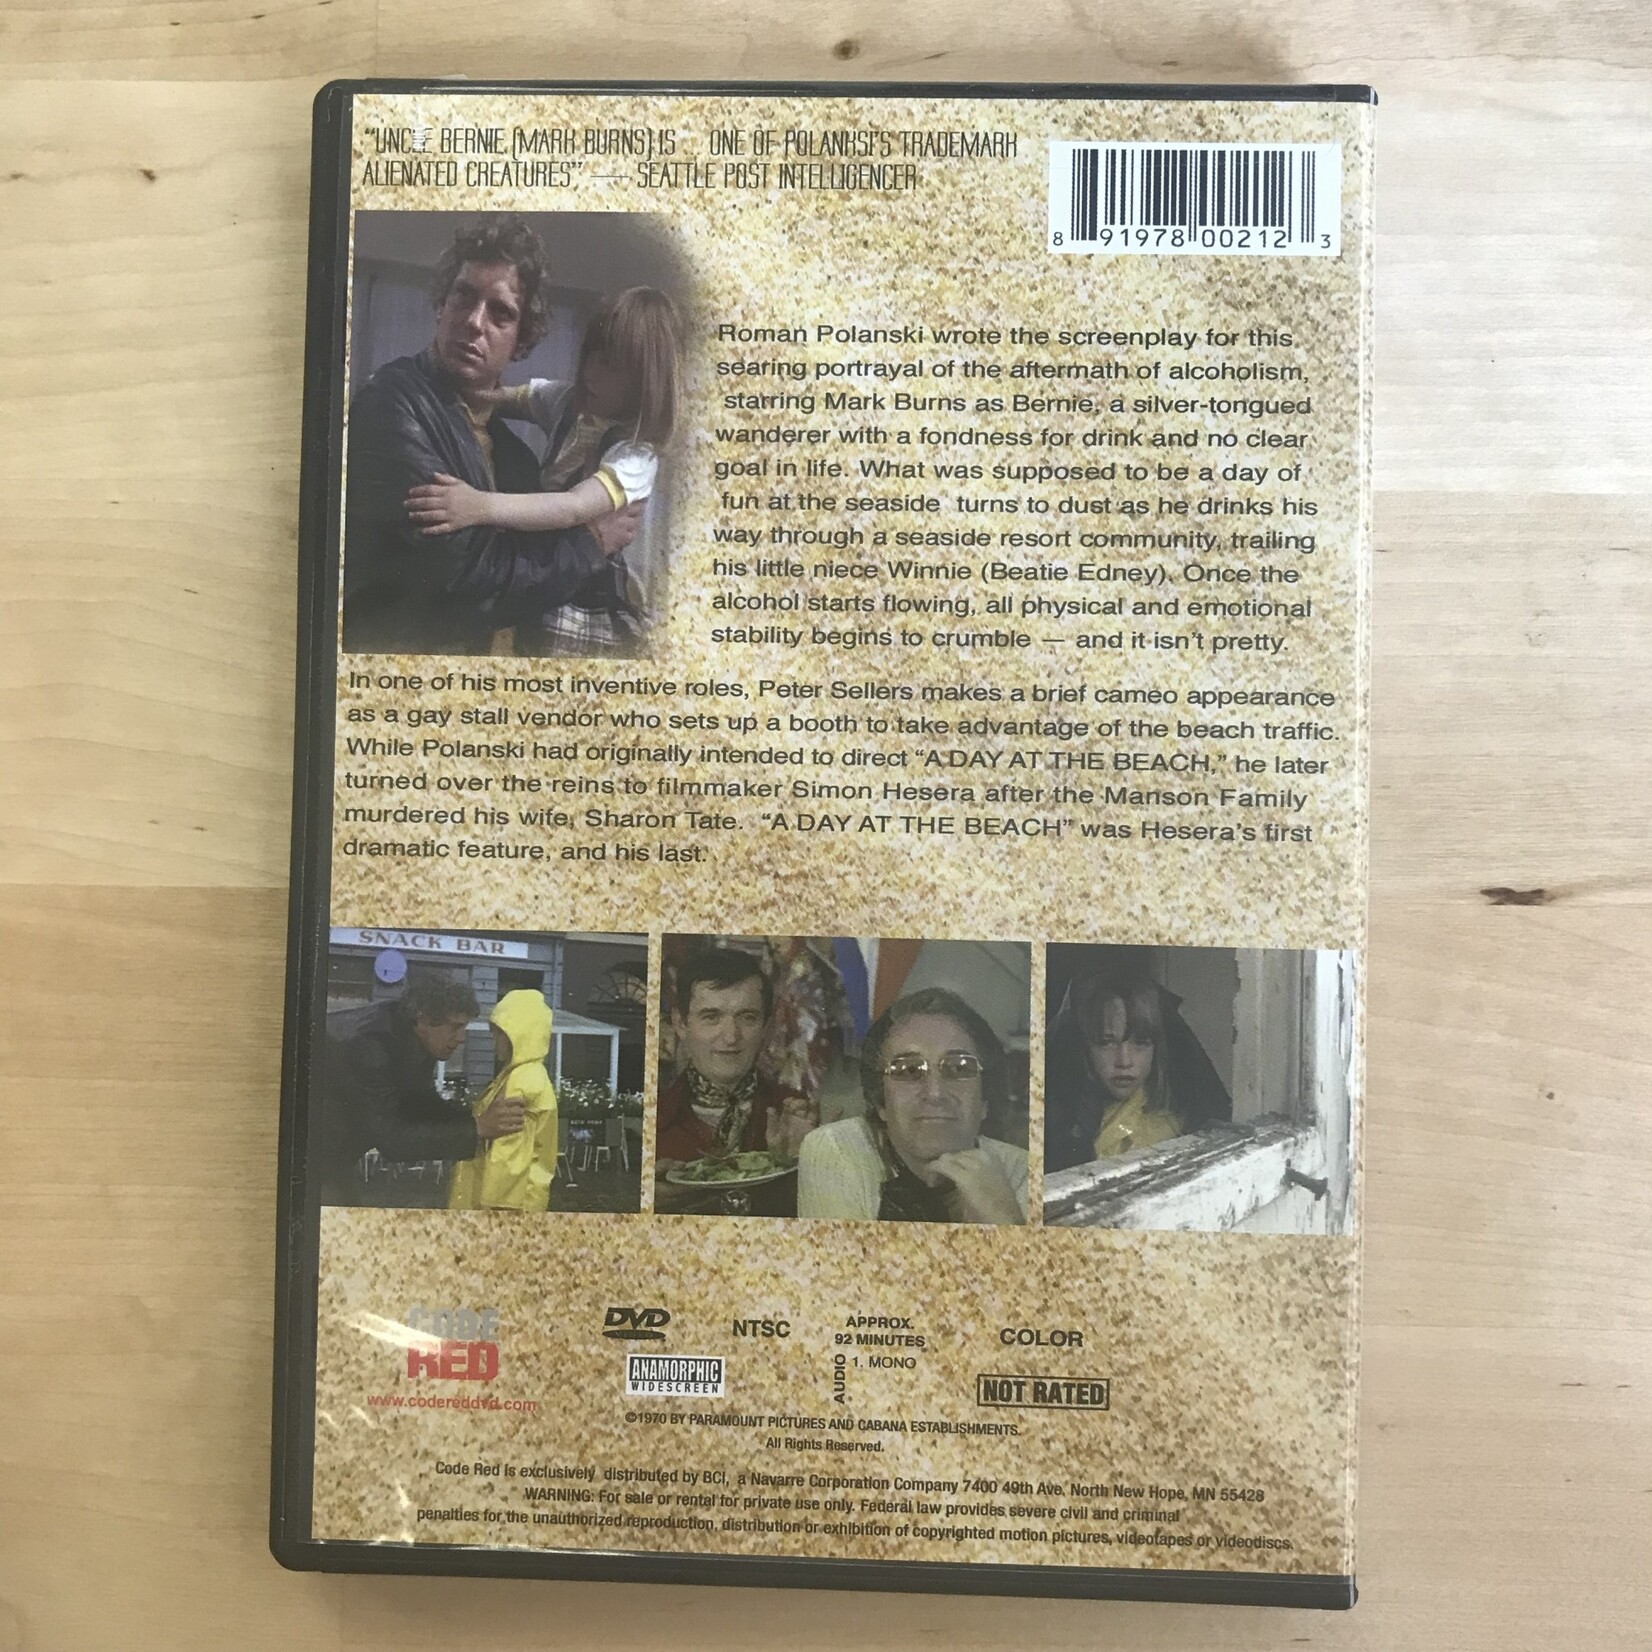 Day At The Beach: The Lost Roman Polanski Masterpiece - DVD (USED)